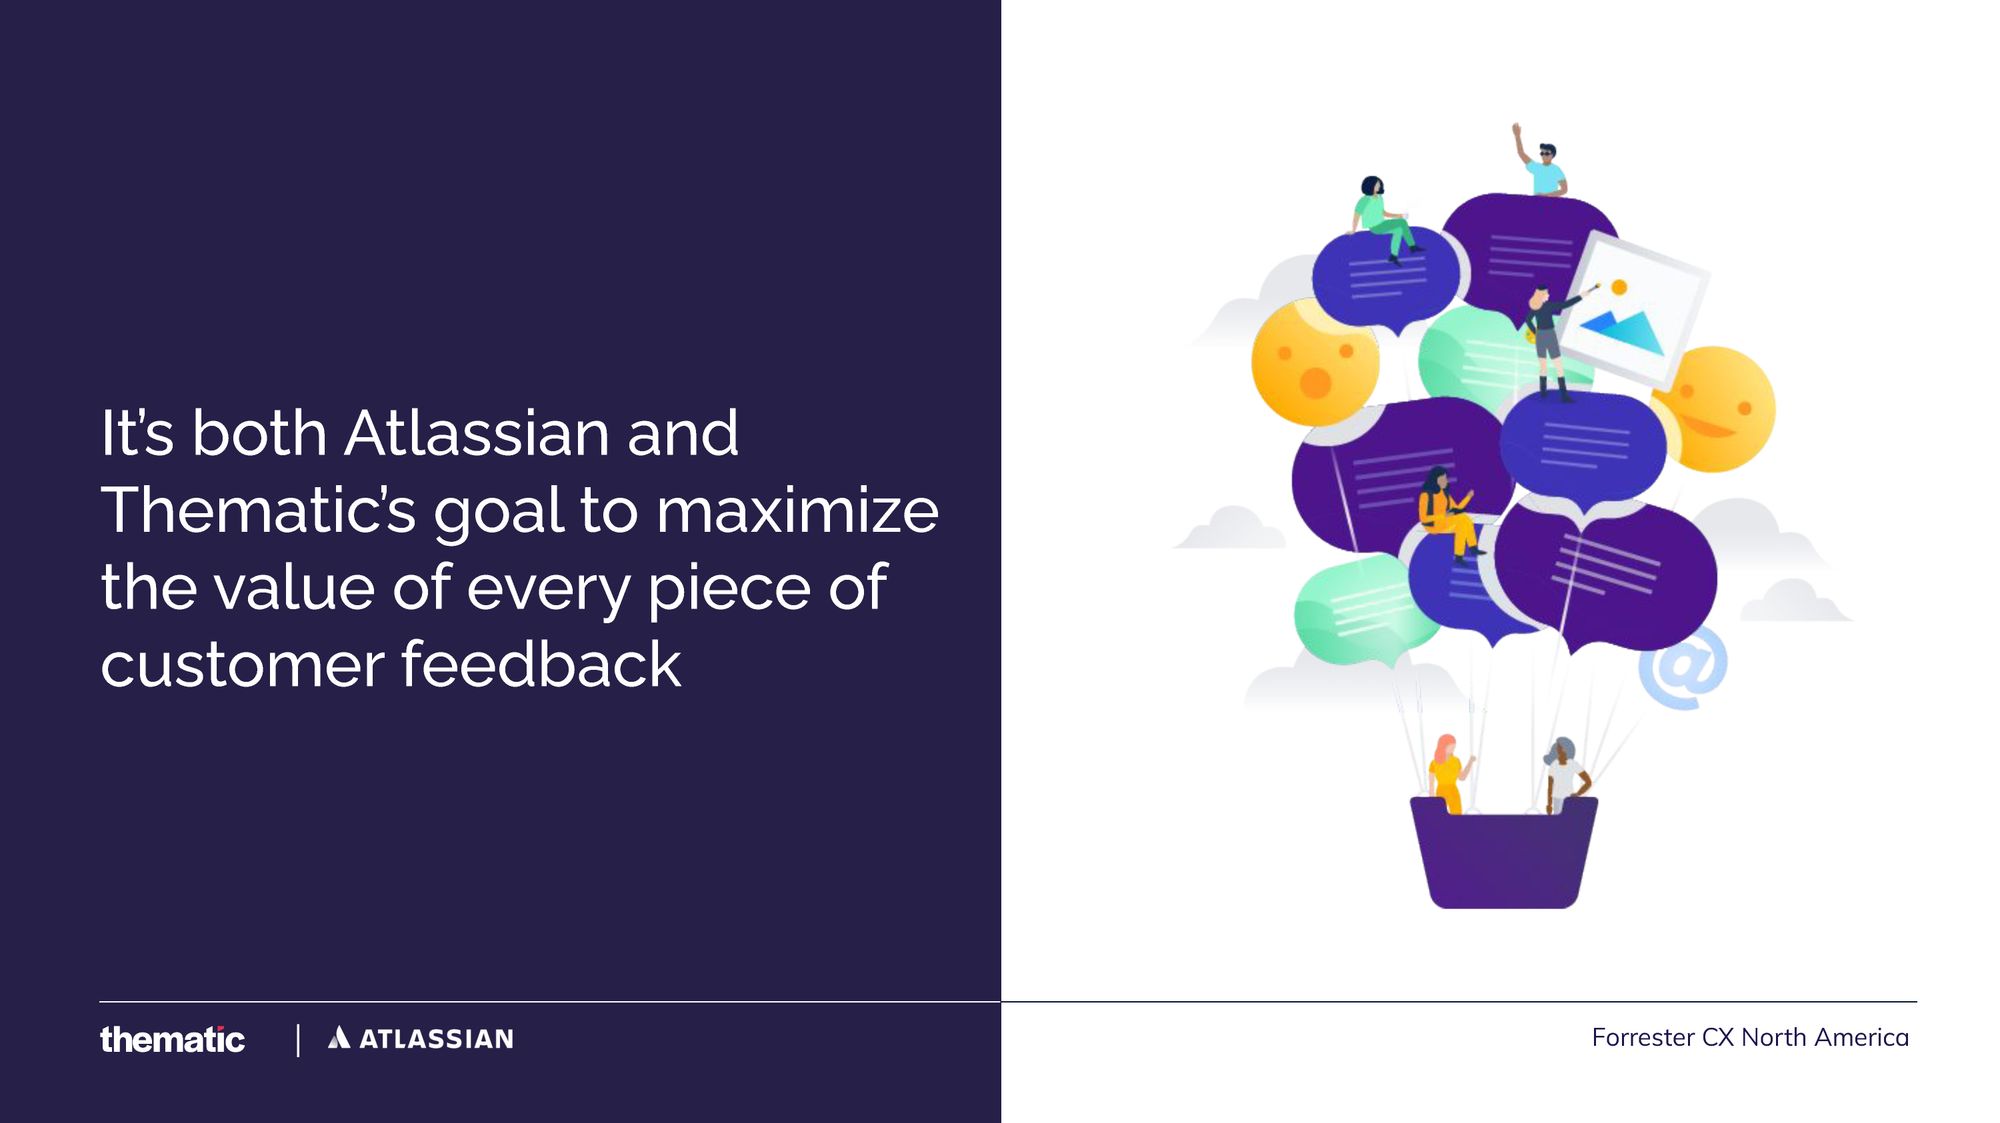 Thematic makes it possible to maximise the value of feedback